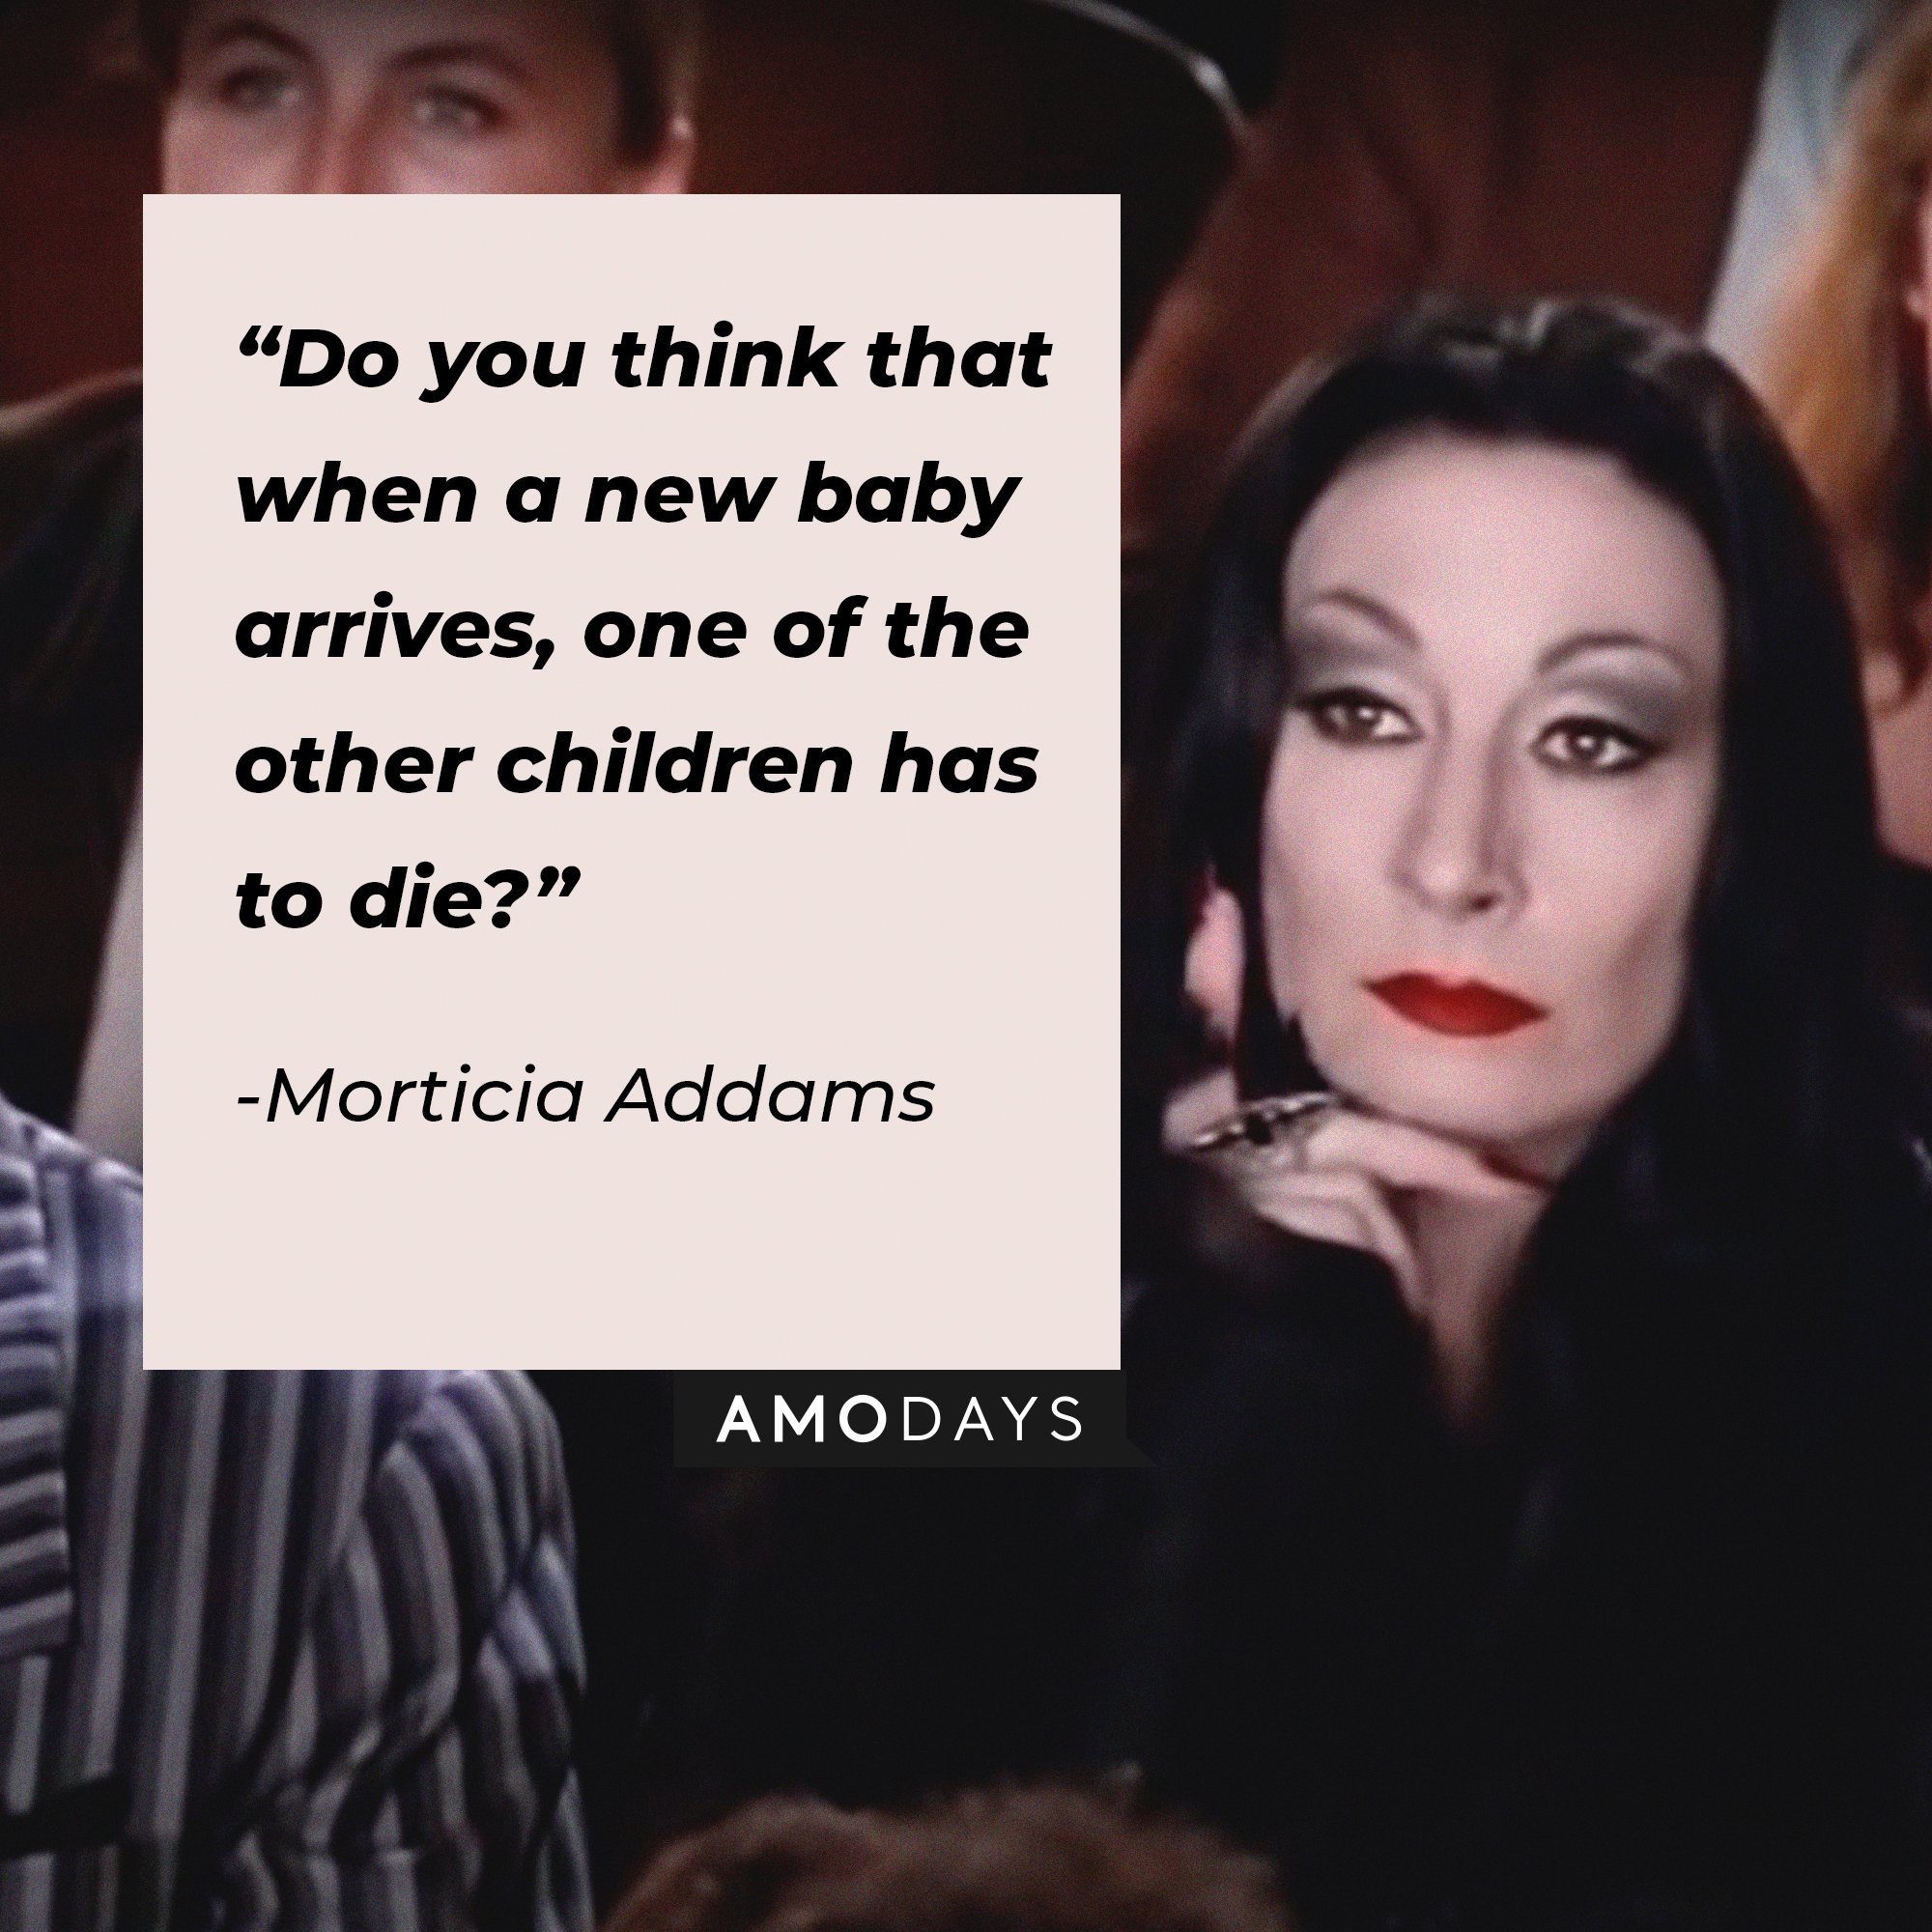 Morticia Addams’ quote: “Do you think that when a new baby arrives, one of the other children has to die?” | Image: AmoDays  